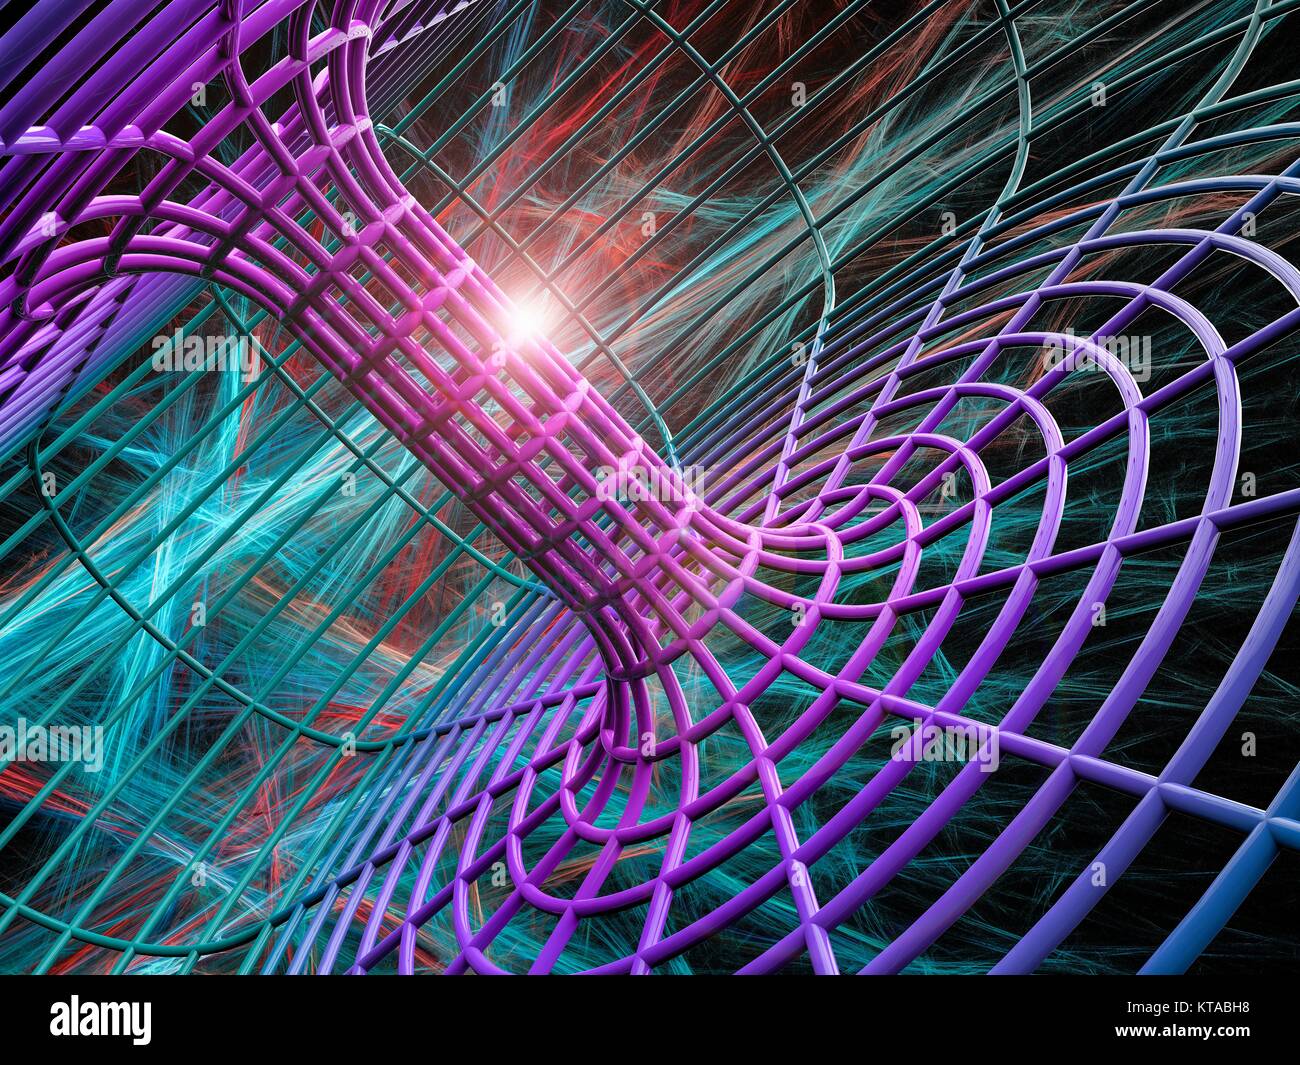 Wormhole.Conceptual computer illustration of a tunnel,representing a wormhole.Wormholes are a possible solution to Einstein's equations that describe the properties of space-time,the continuum of unified space and time.Theorists have suggested that on the smallest scale of the universe (the incredibly small Planck length),the fabric of space-time may be riddled with these tunnel-like wormholes.The concept is also found in science fiction,where they are used to travel between distant points of the universe.However,as wormholes would last for less than a second,such use would probably be Stock Photo